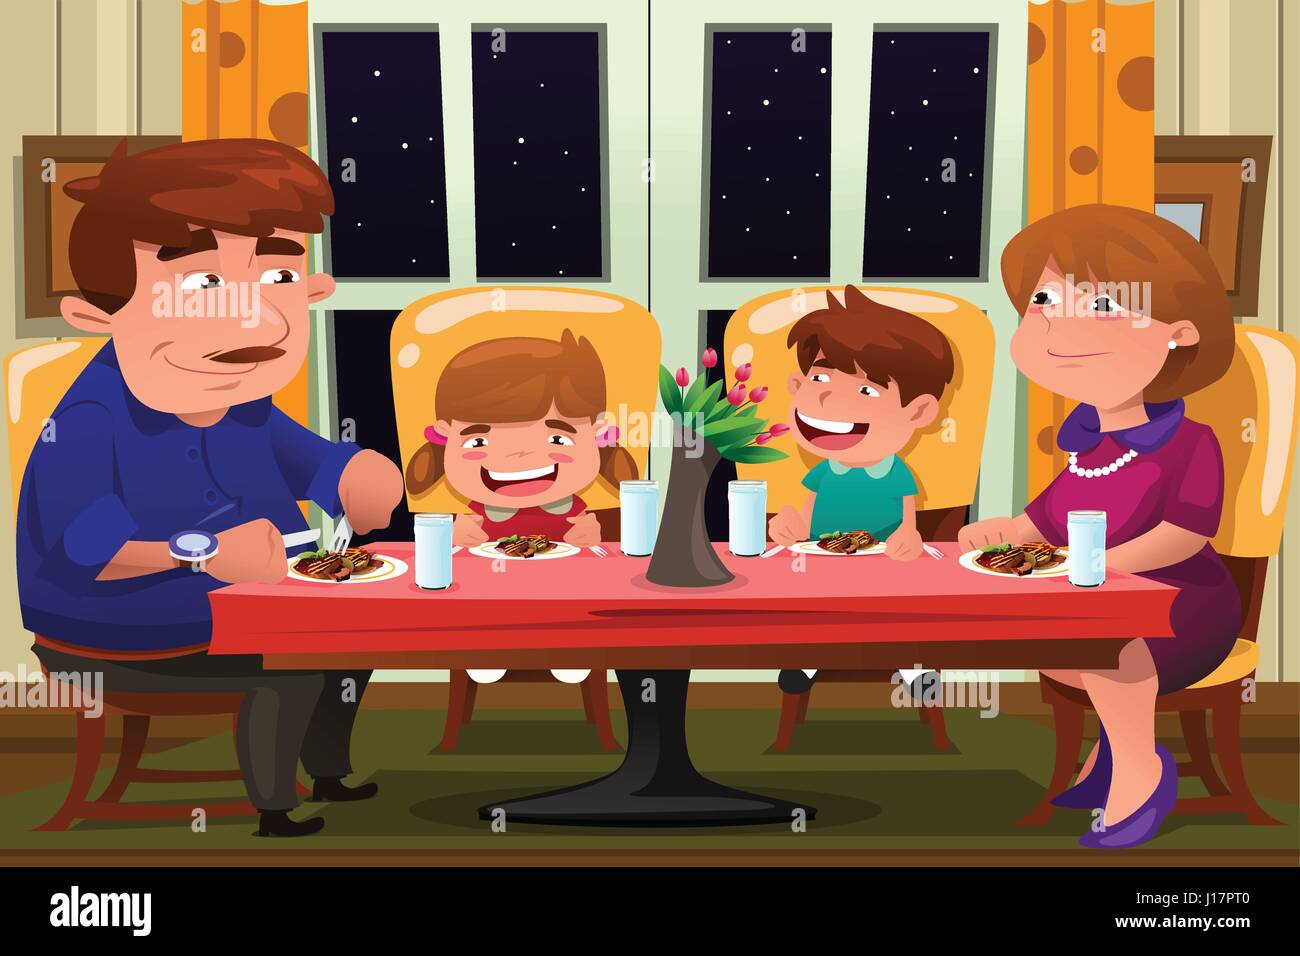 A vector illustration of happy family eating dinner together Stock